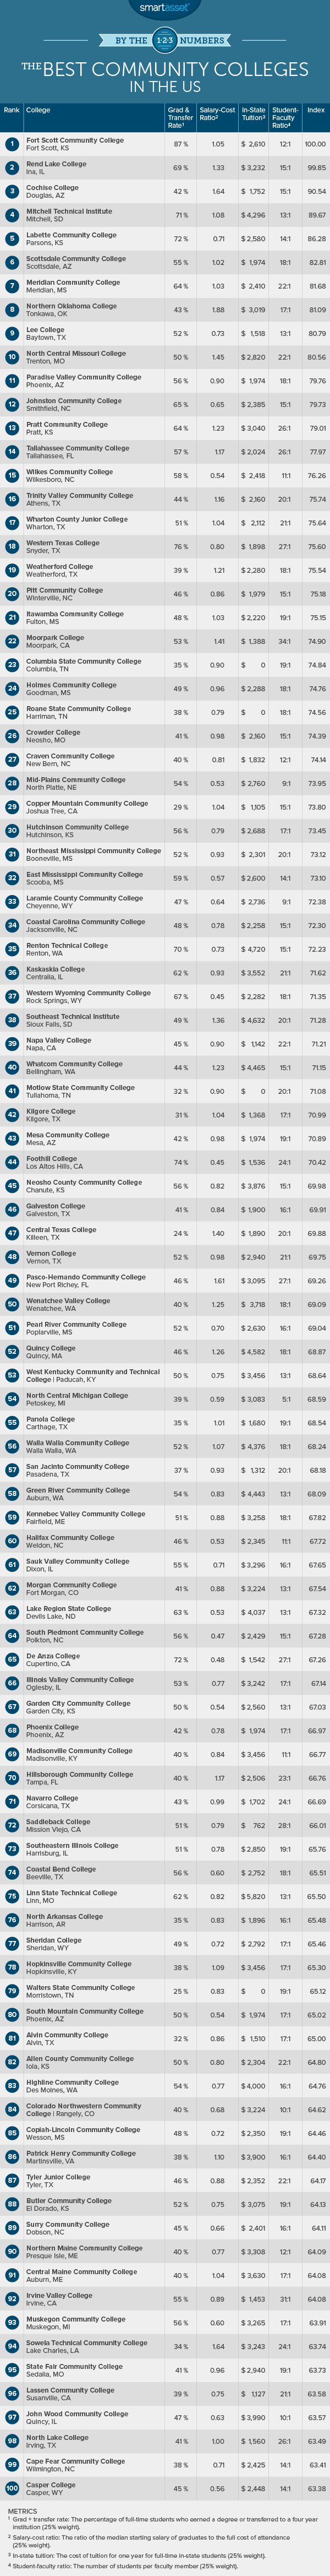 By the Numbers: The Best Community Colleges in the US